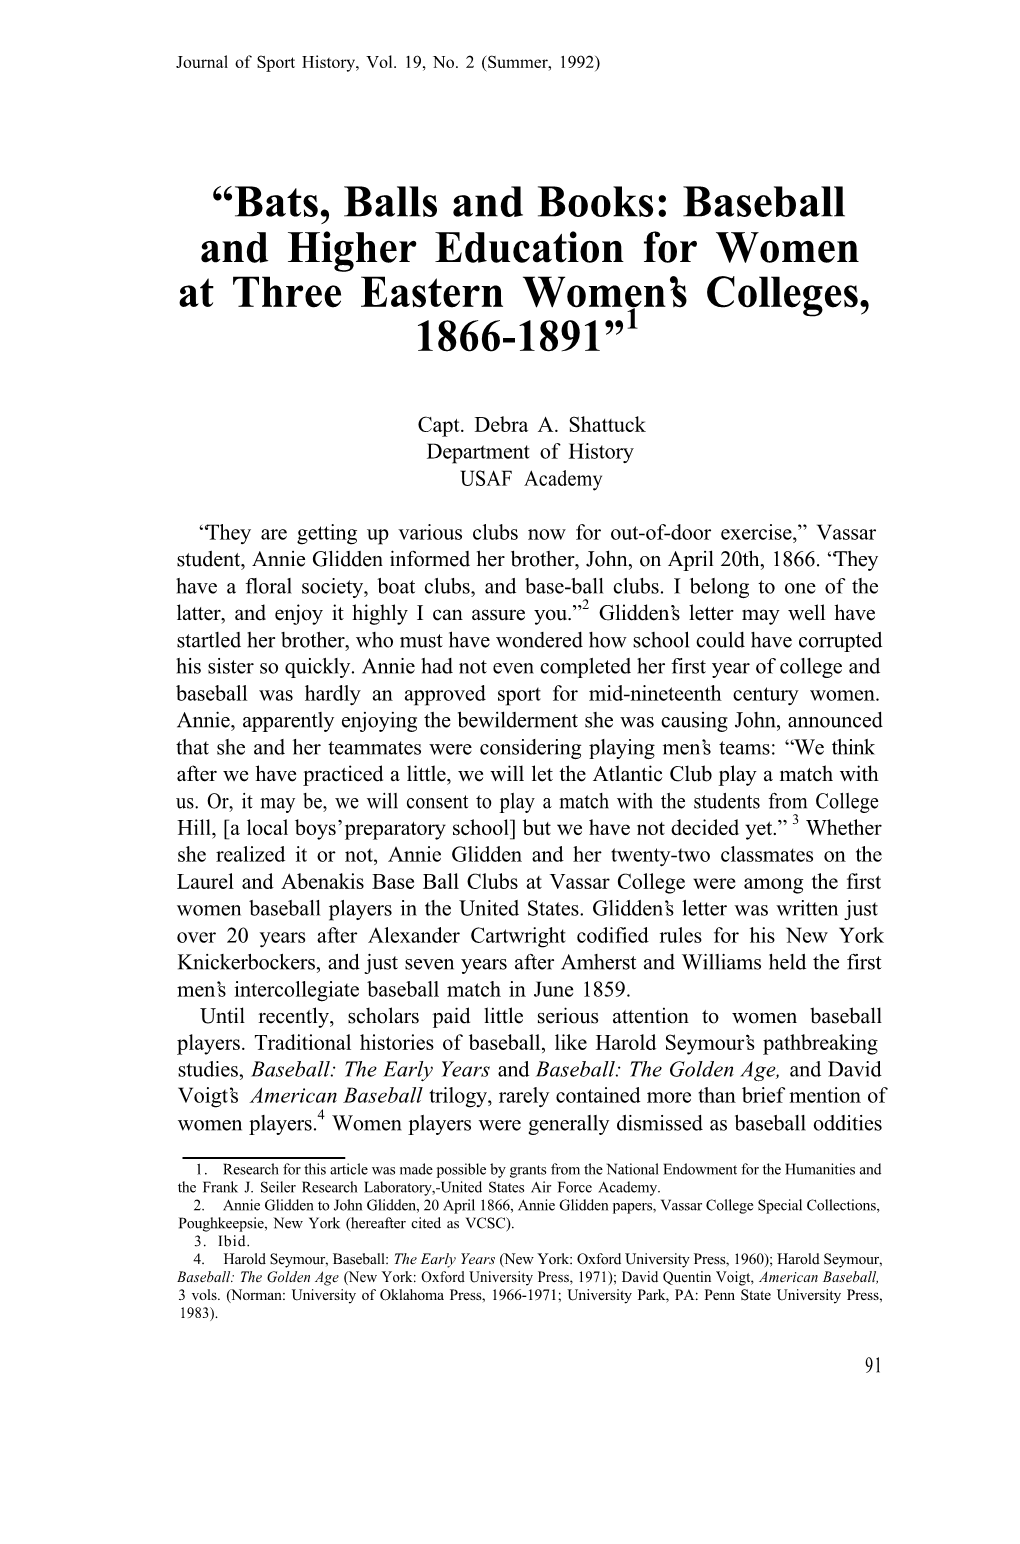 Bats, Balls and Books: Baseball and Higher Education for Women at Three Eastern Women’S Colleges, 1866-1891”1